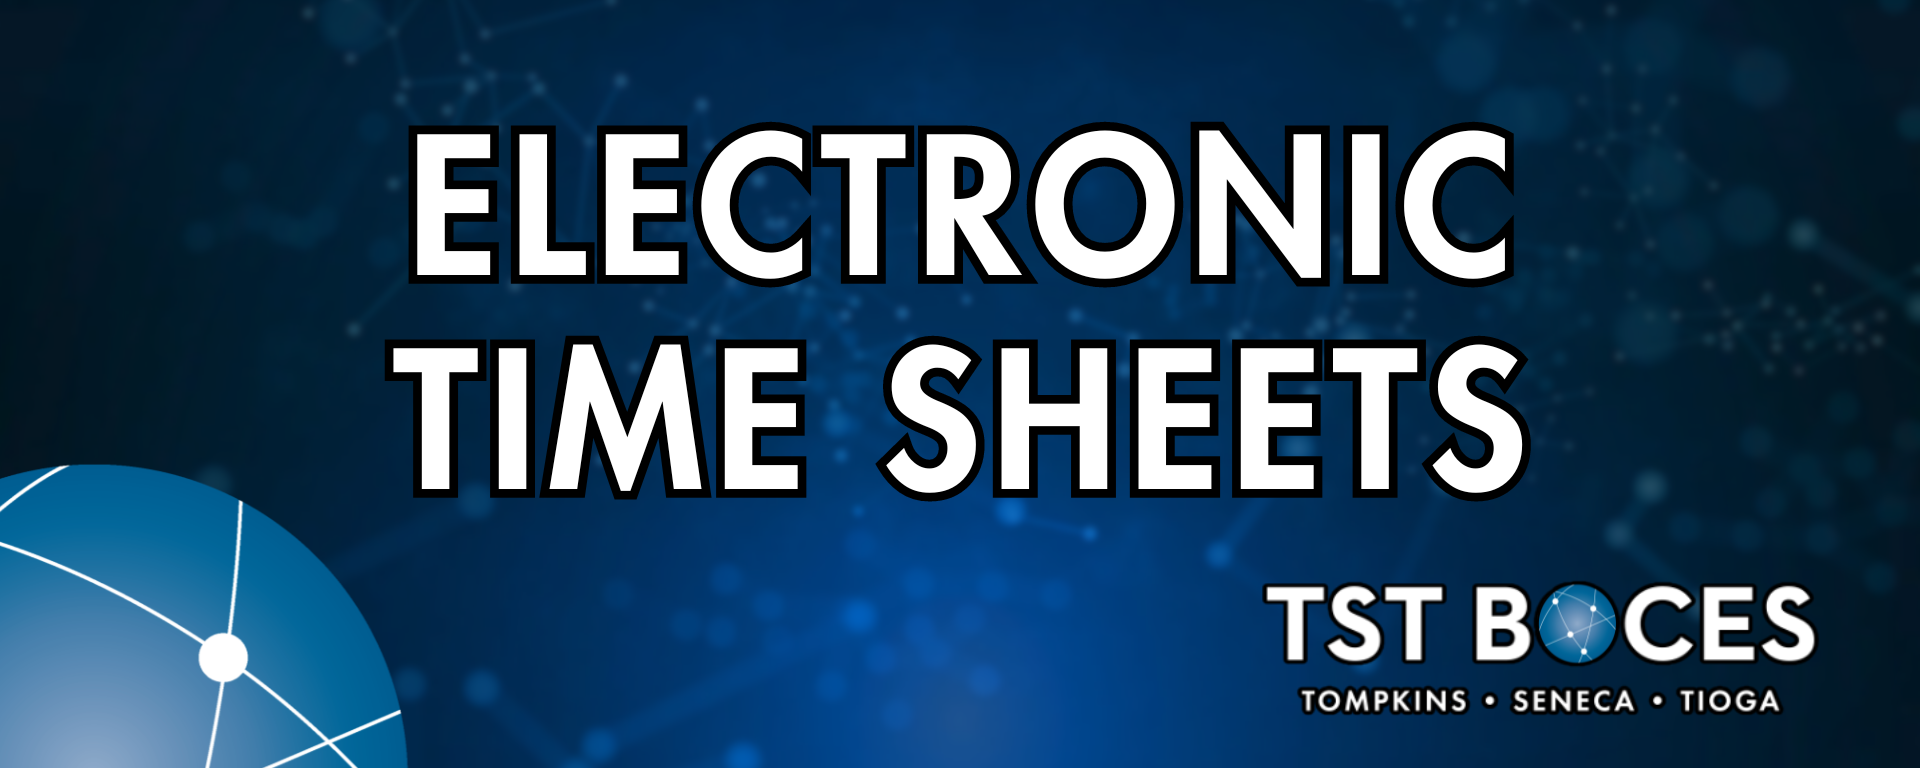 electronic time sheets